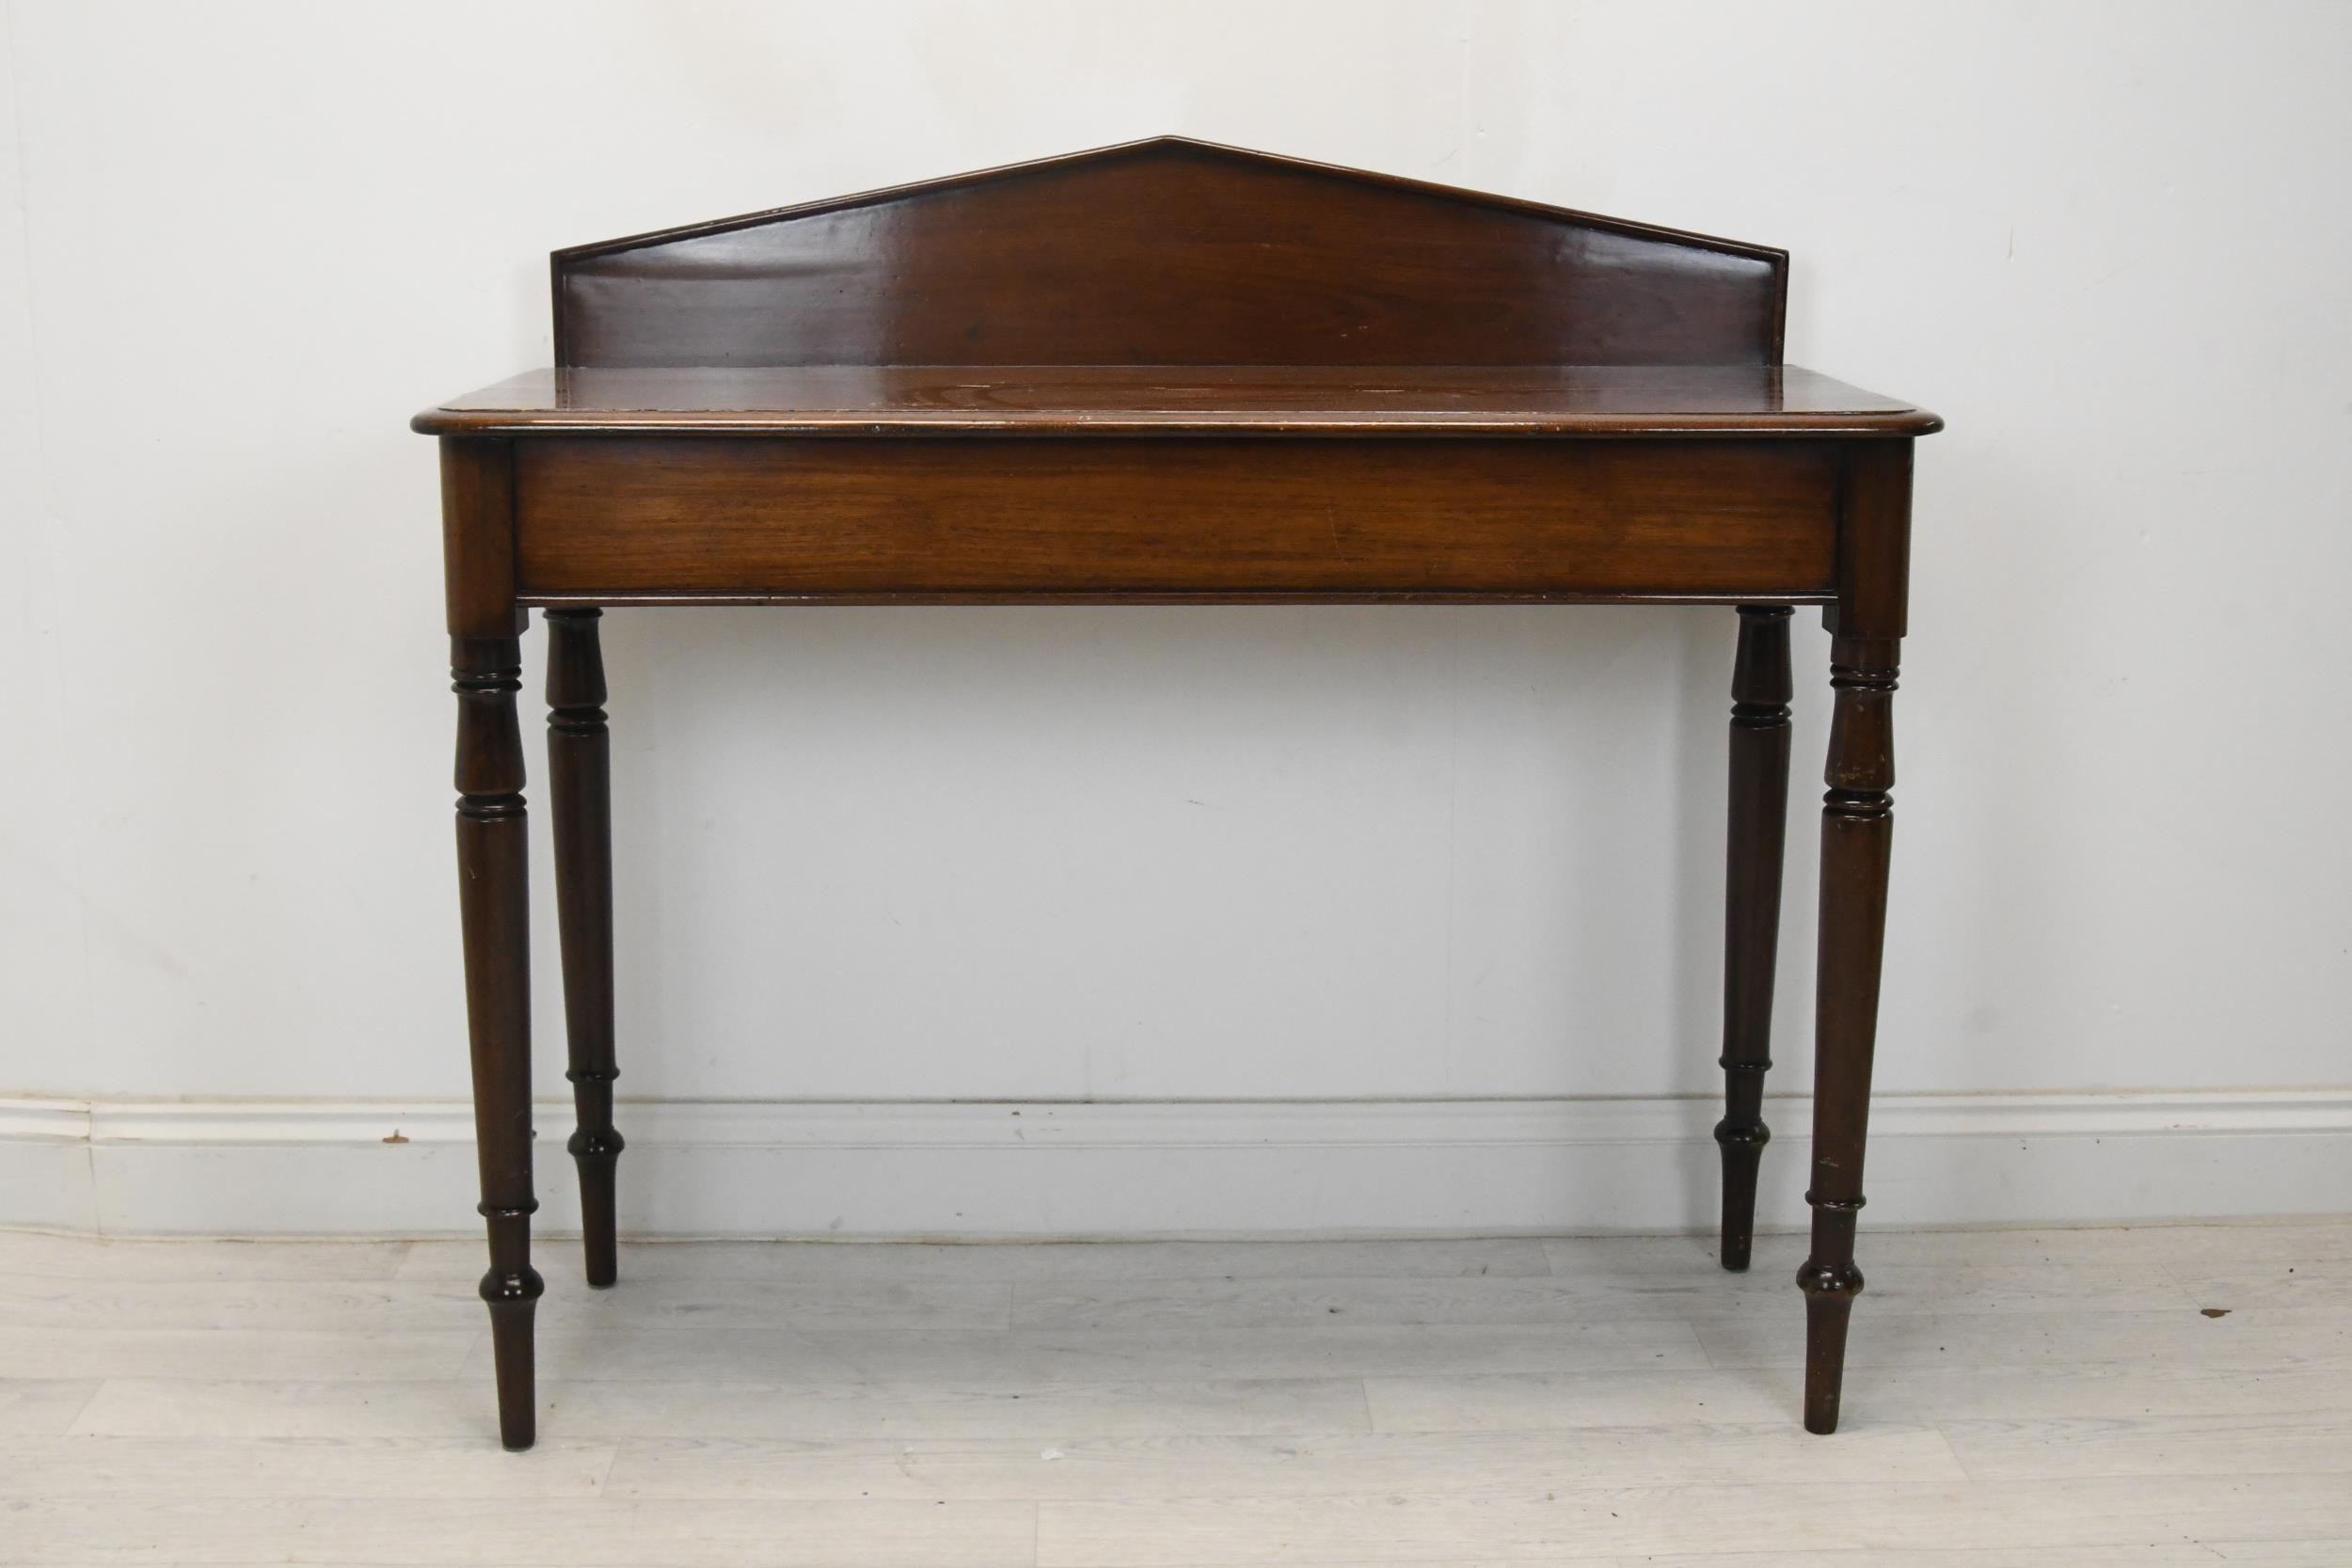 Console table, mid 19th century mahogany on turned supports. H.98 W.102 D.42 (Some damage as seen).